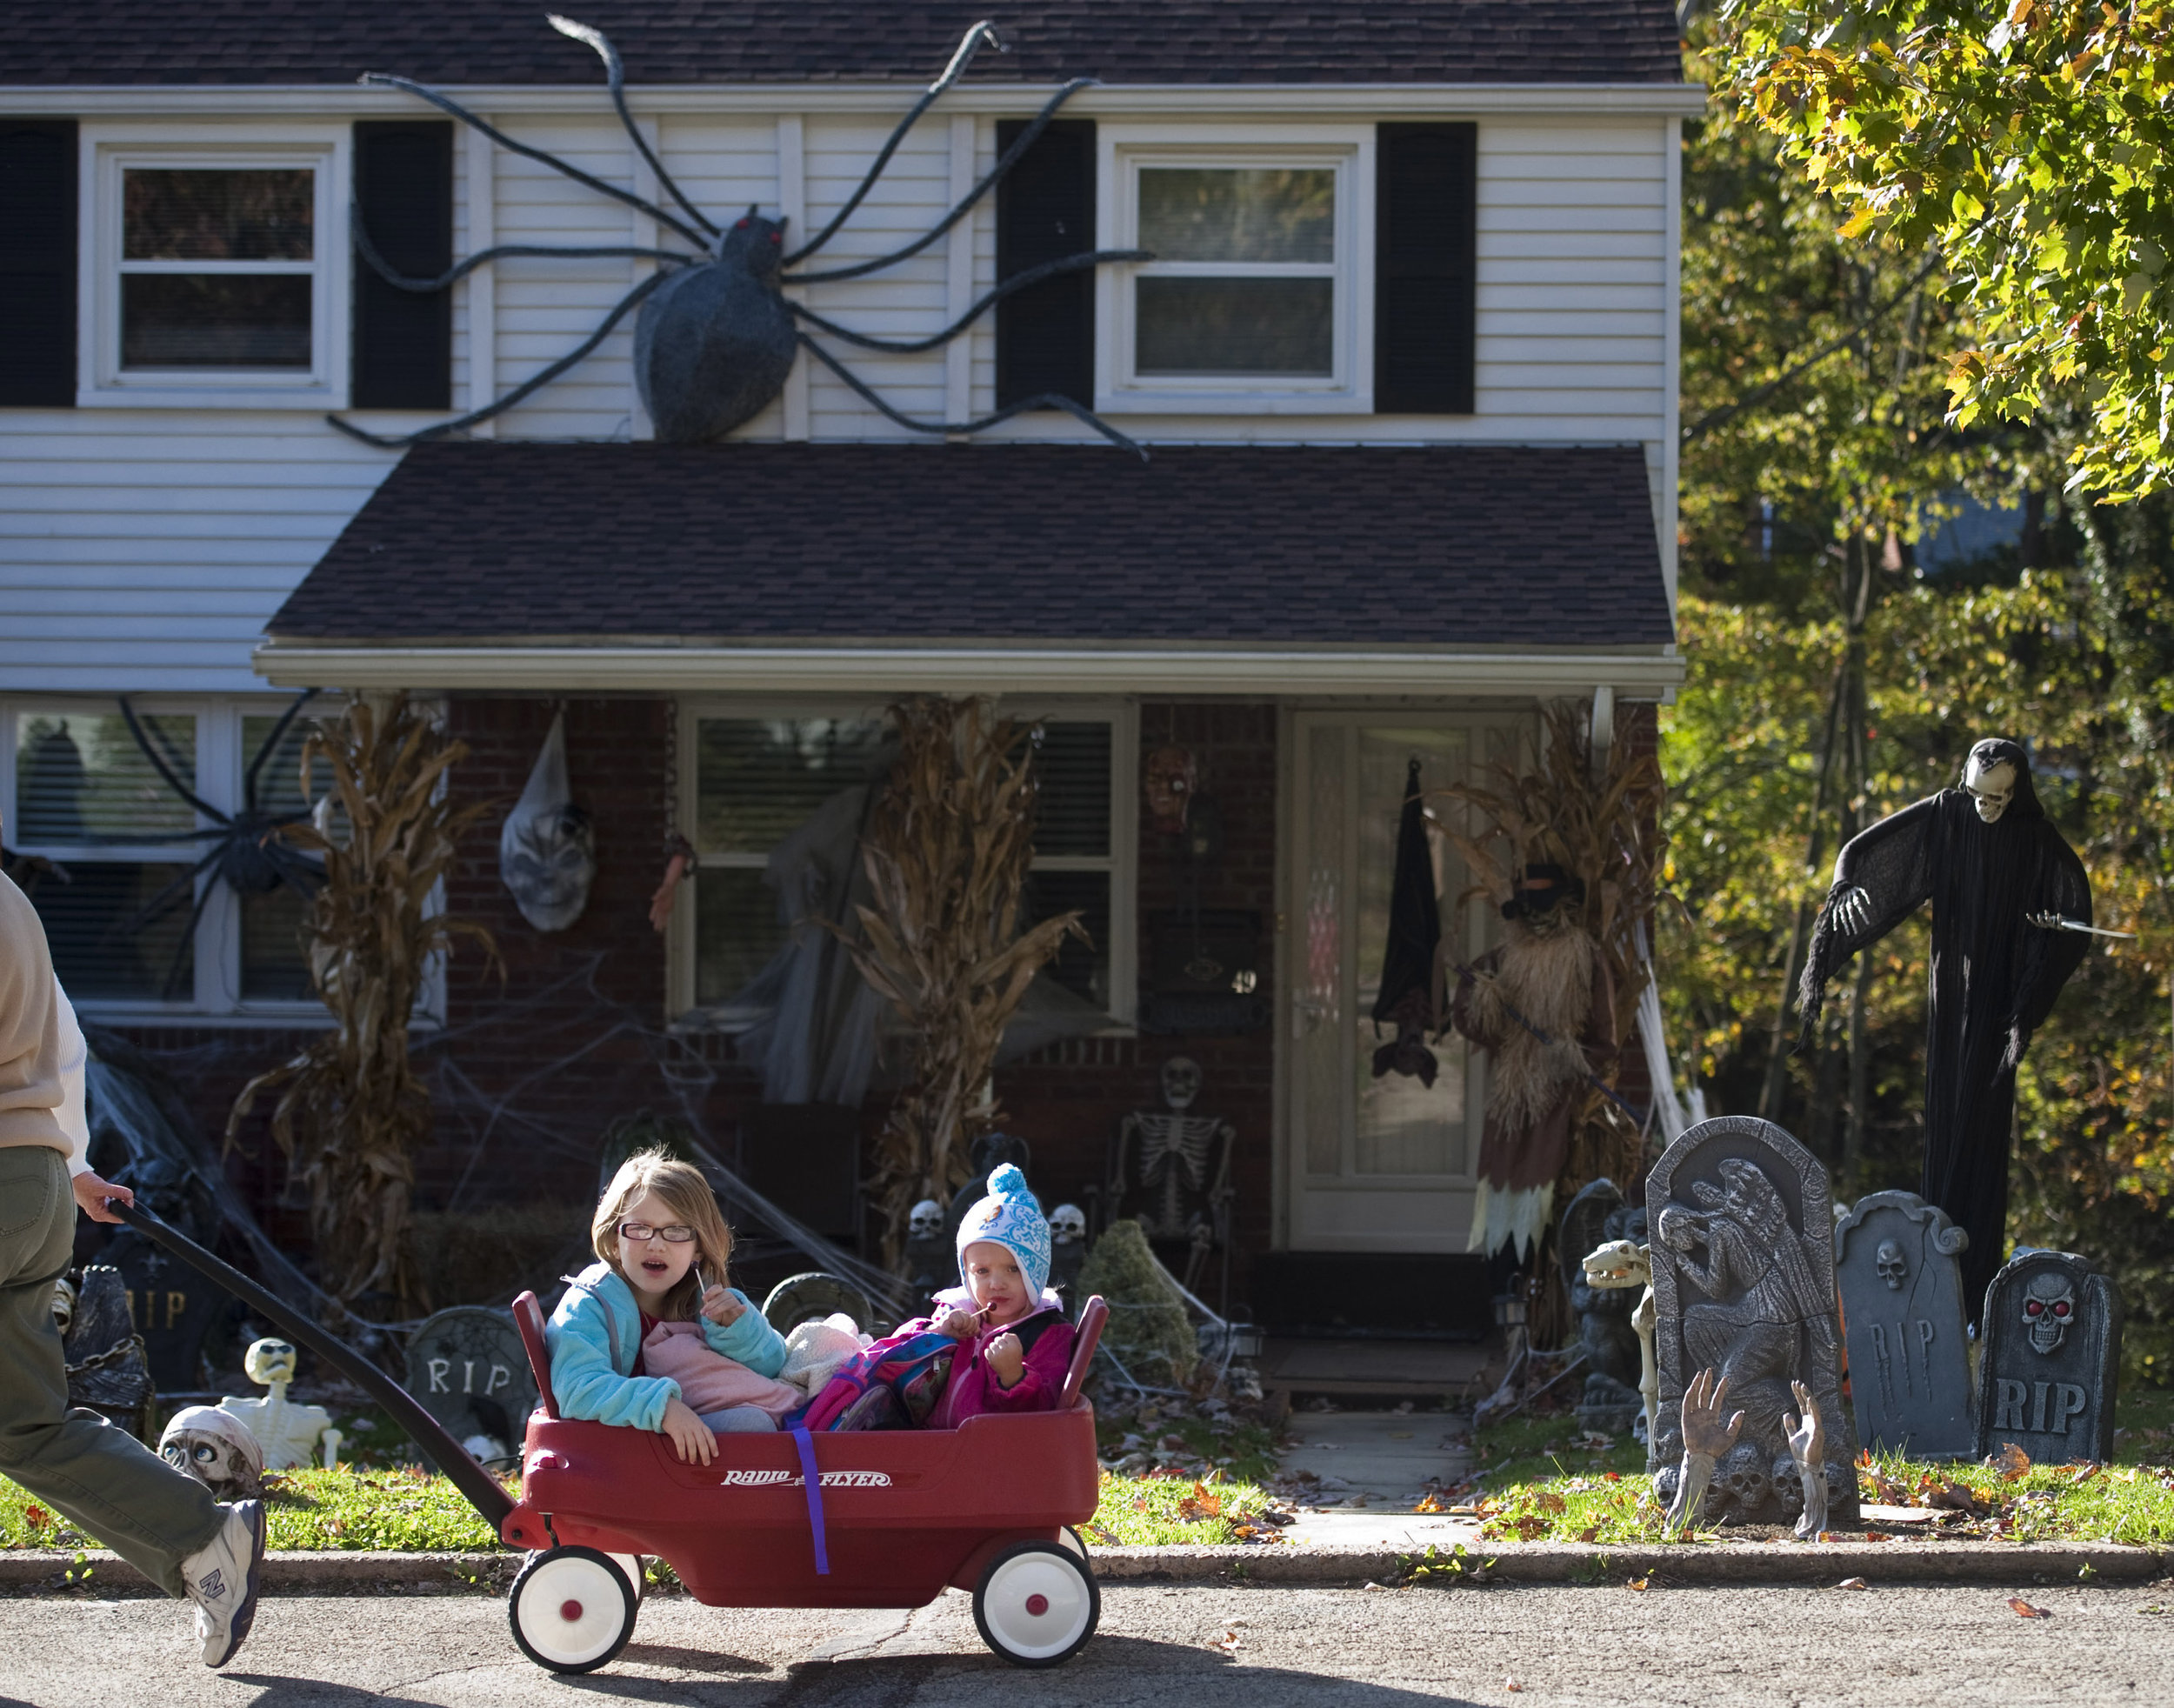  Sisters Carissa and Abby Kelly, 5 and 2, enjoy their lollipops while admiring their neighborhood's Halloween decorations during a walk with their grandmother Linda Kelly along Forest Avenue in Greensburg on Tuesday, Oct. 25, 2016. Carissa and Abby p